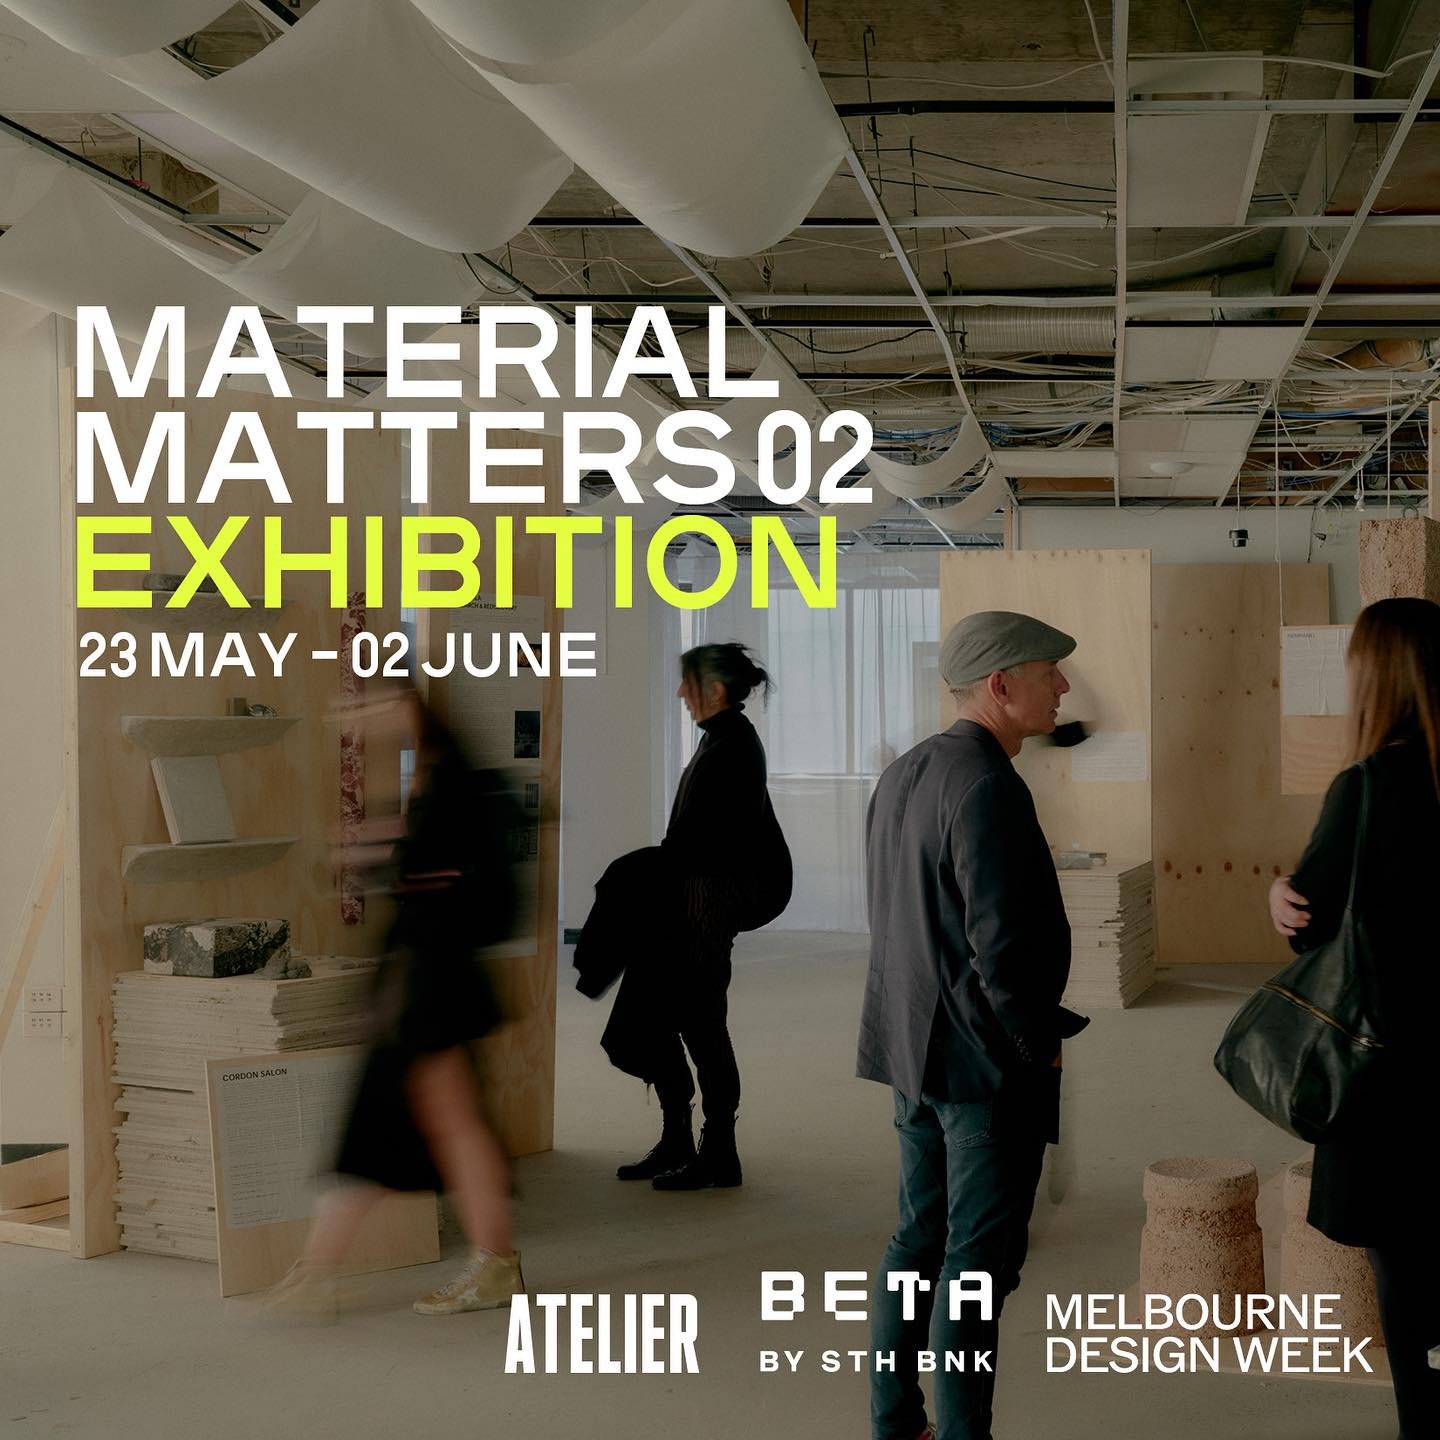 We&rsquo;re delighted to announce we&rsquo;re a part of this year&rsquo;s Melbourne Design Week in collaboration with Design Futures Lab, exhibiting in Material Matters 02, the second edition of a sustainable retail-focussed exhibition set inside the